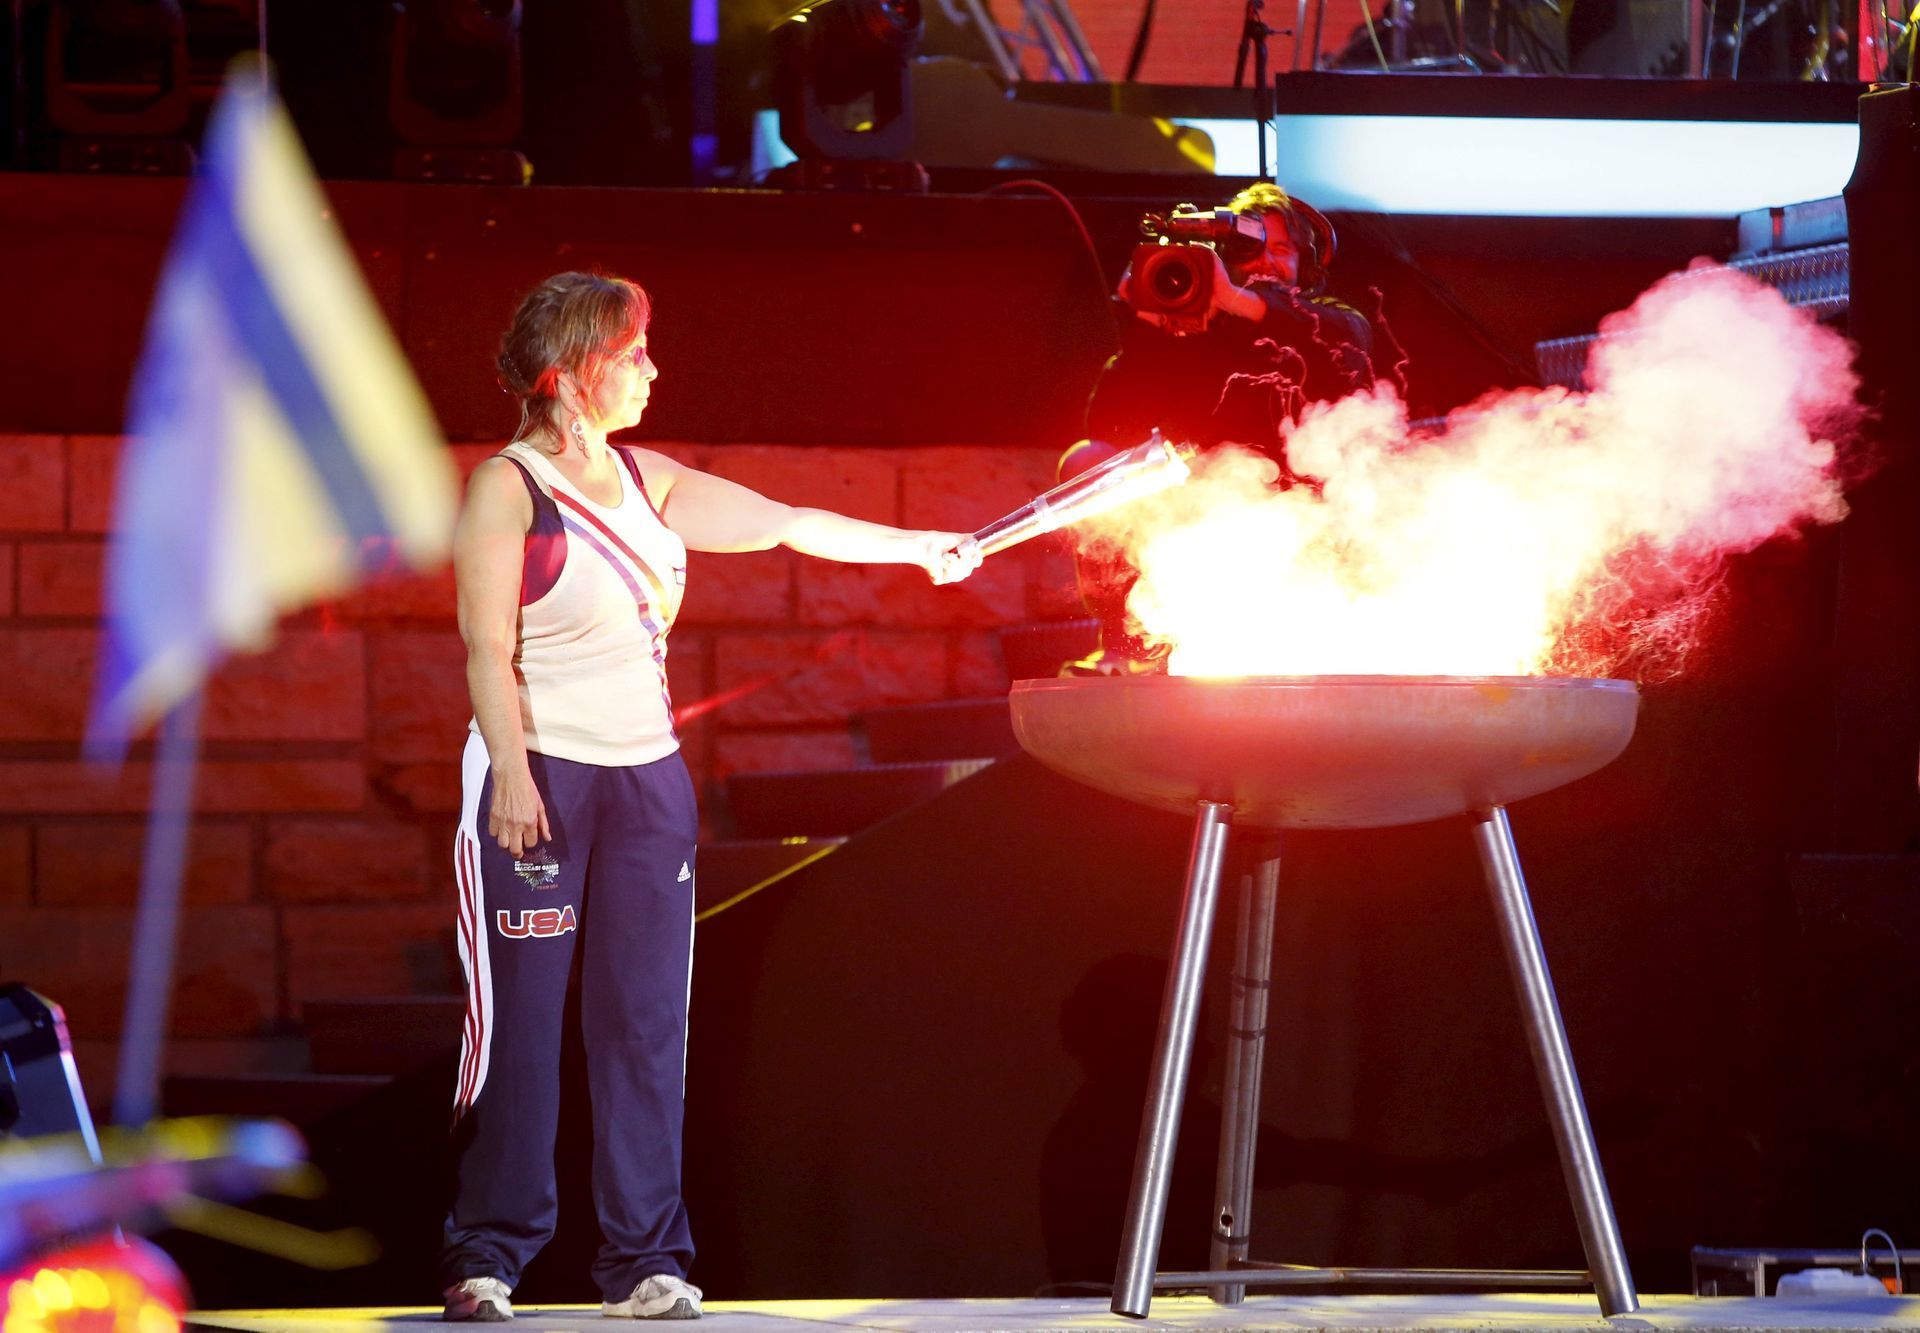 Nancy Luckman of the U.S. lights the flame during the opening ceremony of the 14th European Maccabi Games in Berlin, Germany